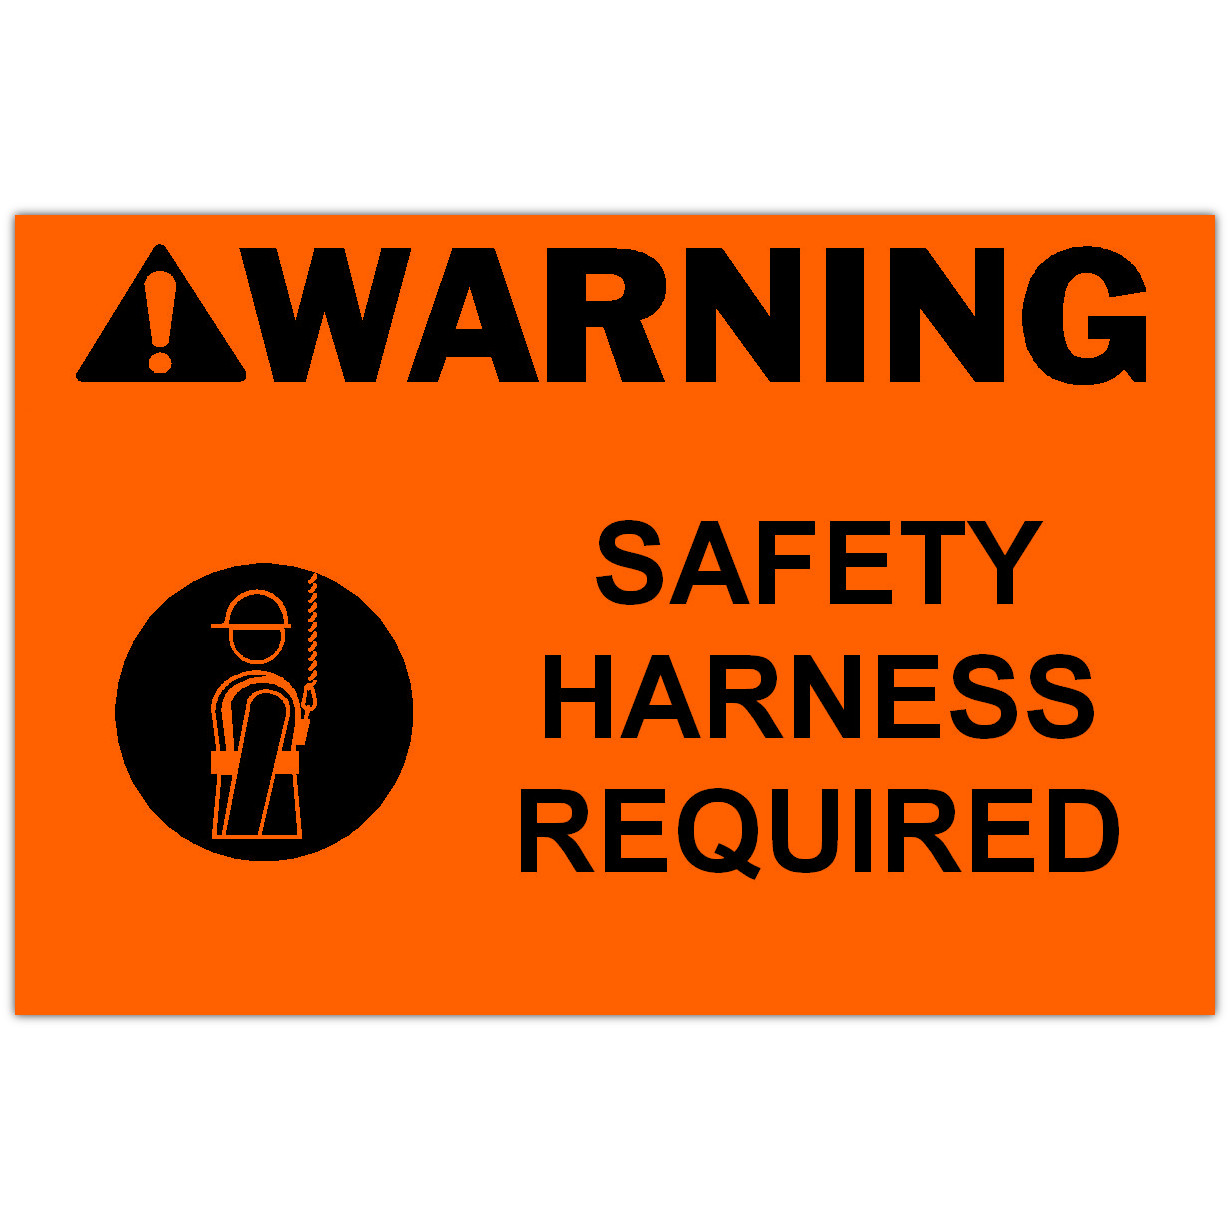 Ask a question about 4" x 6" WARNING Safety Harness Required Label